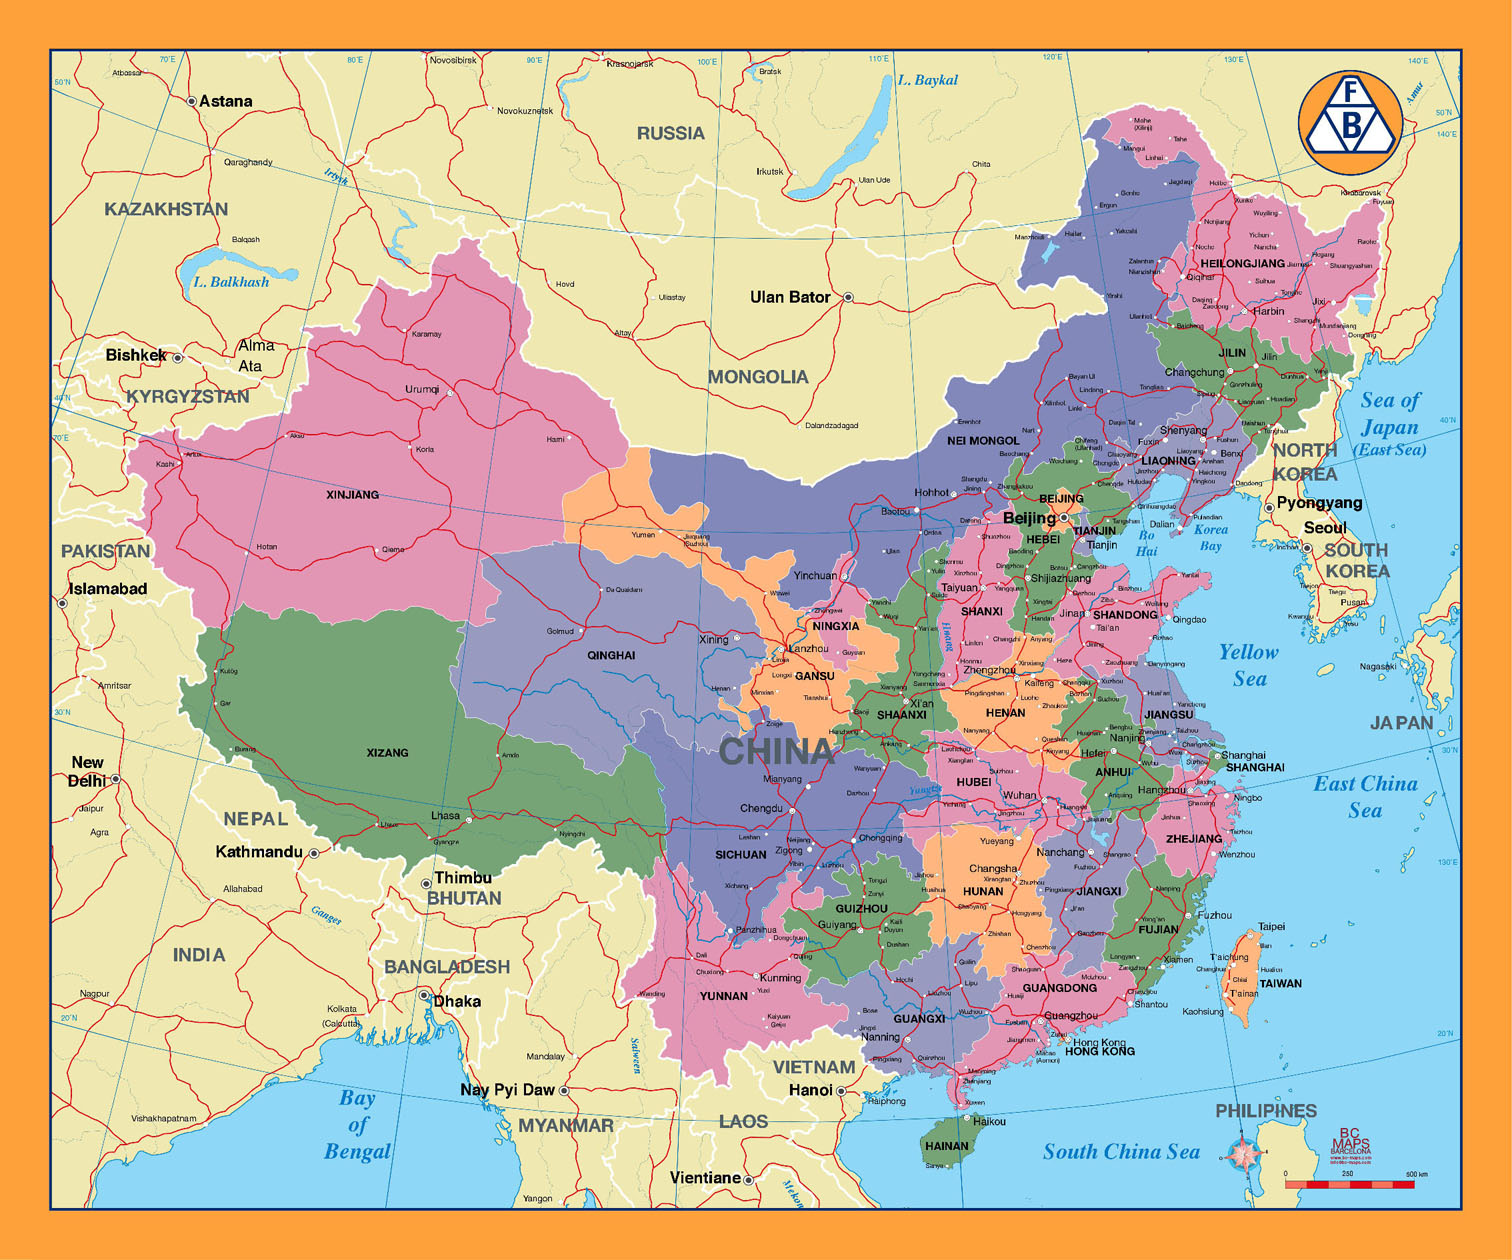 china map provinces and cities 2020 China City Maps Maps Of Major Cities In China china map provinces and cities